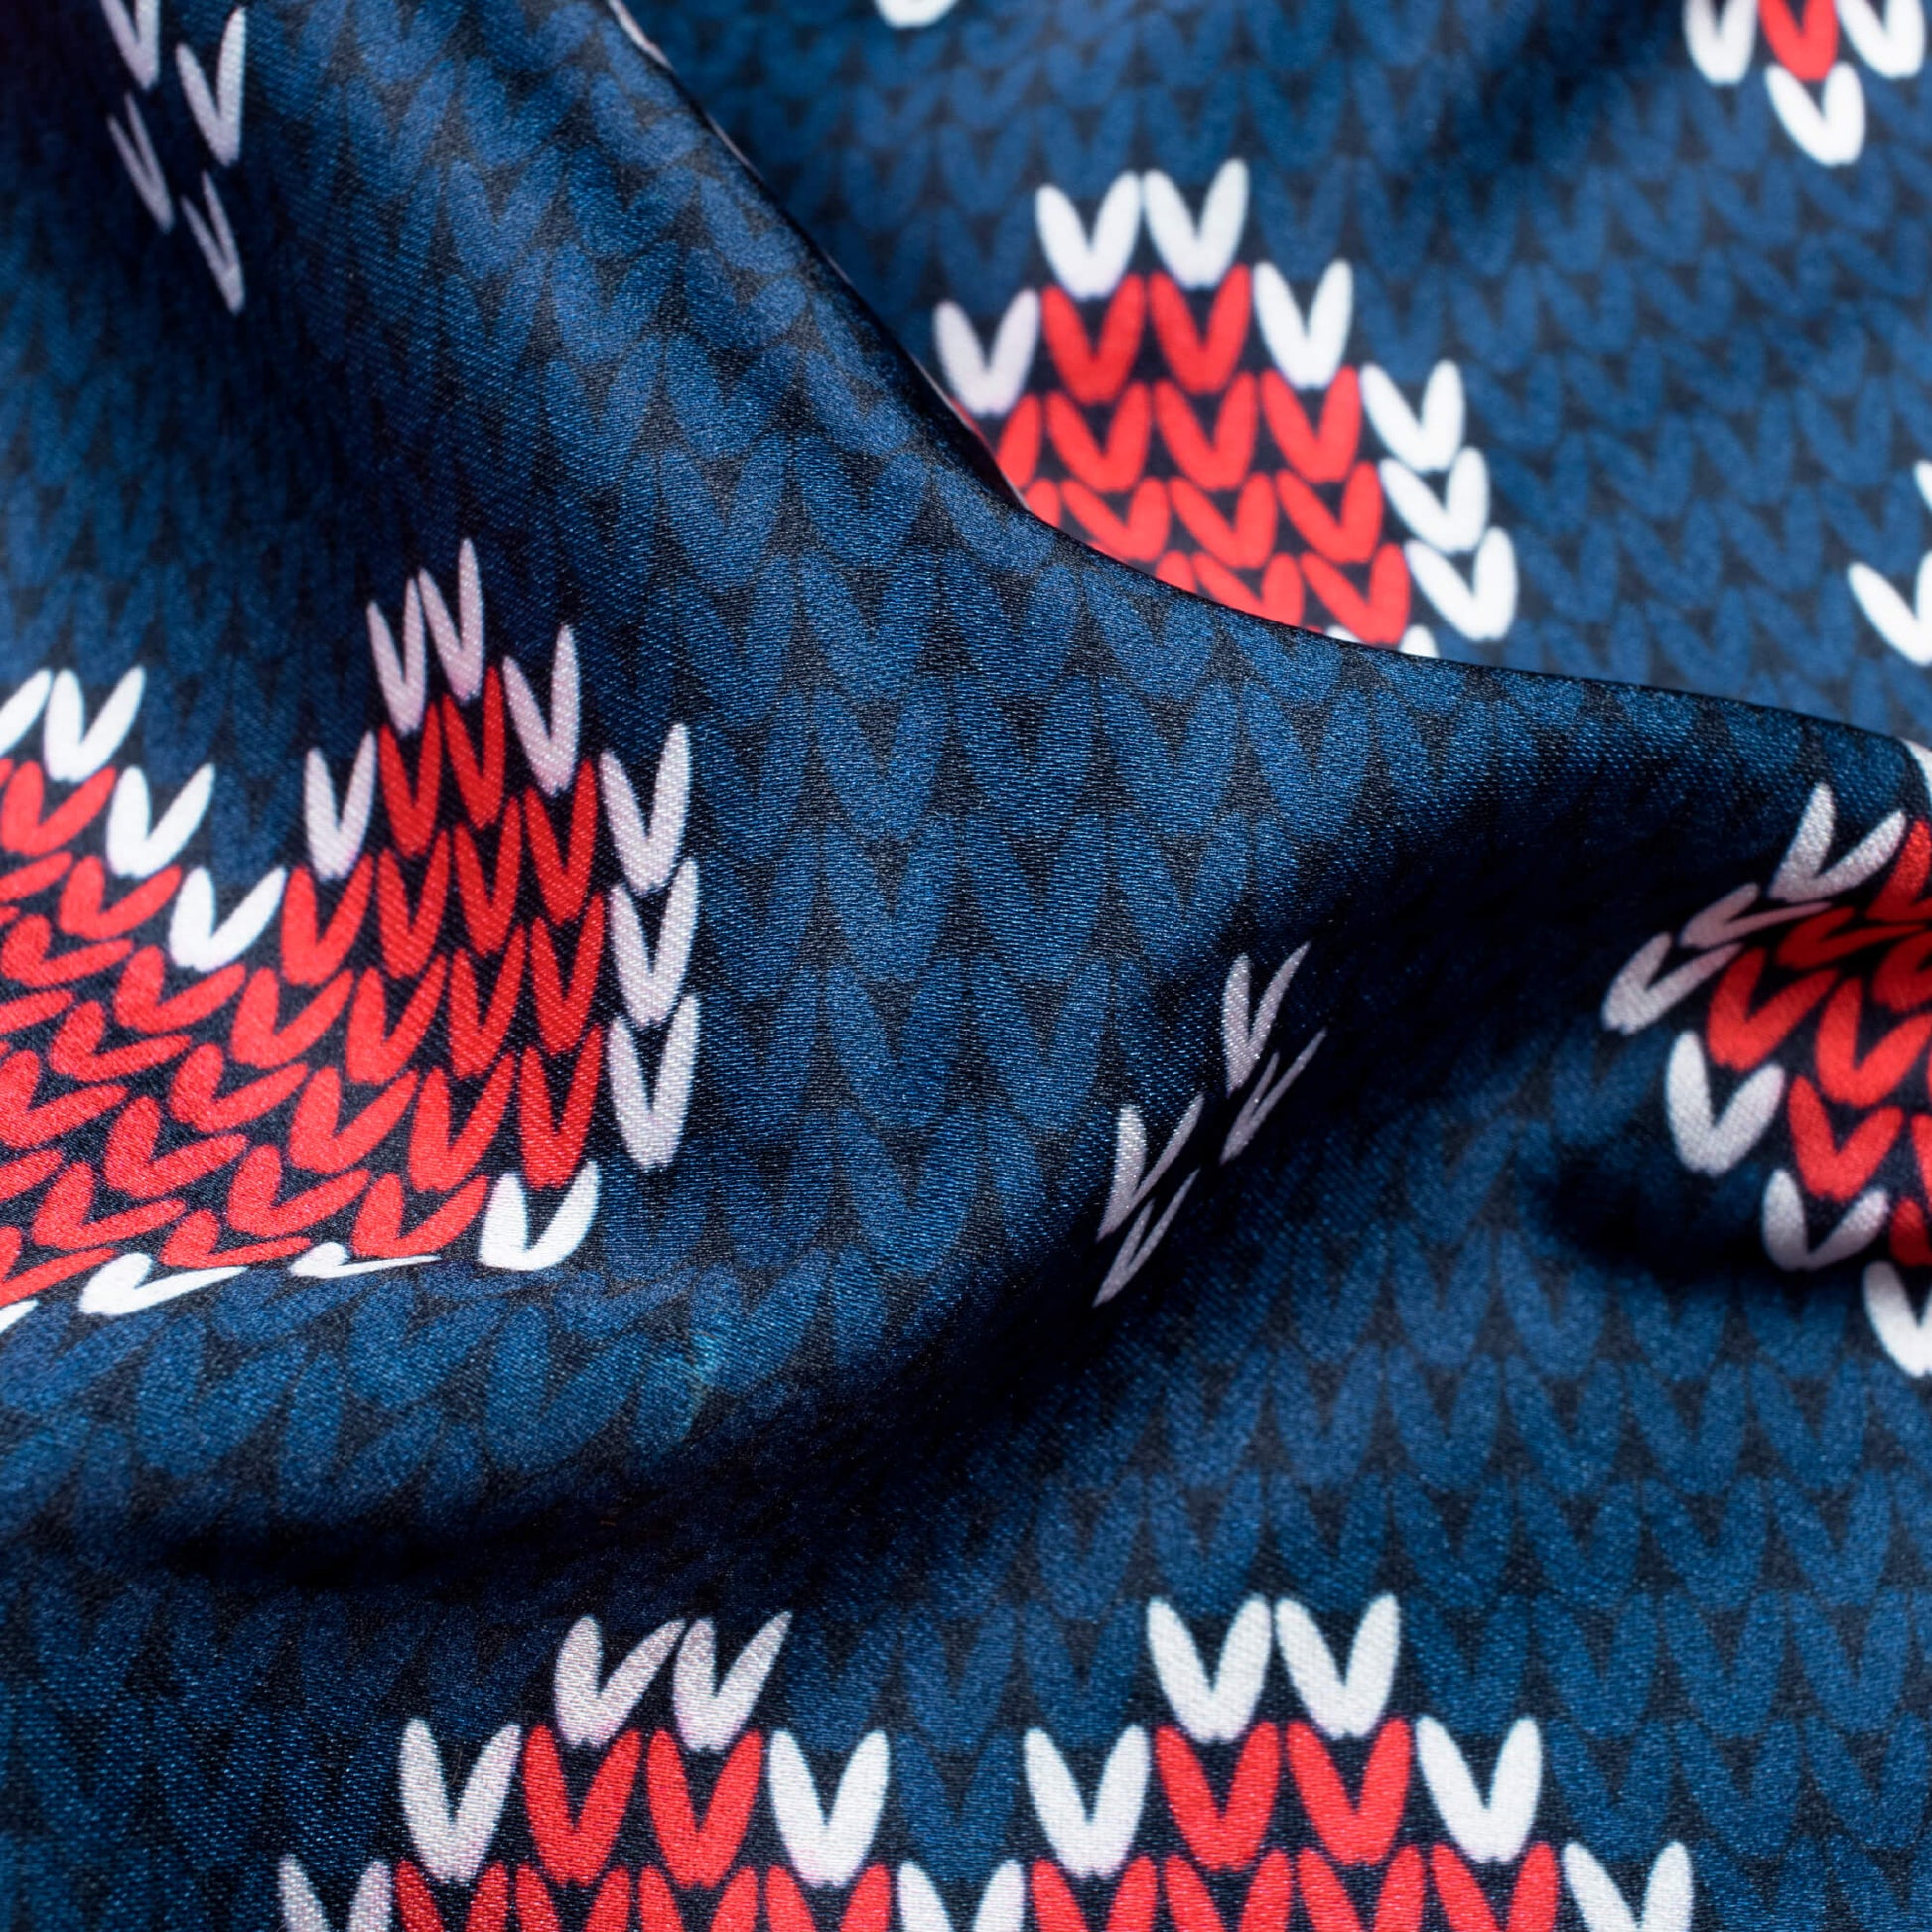 Navy Blue And Red Christmas Pattern Digital Print Japan Satin Fabric - Fabcurate